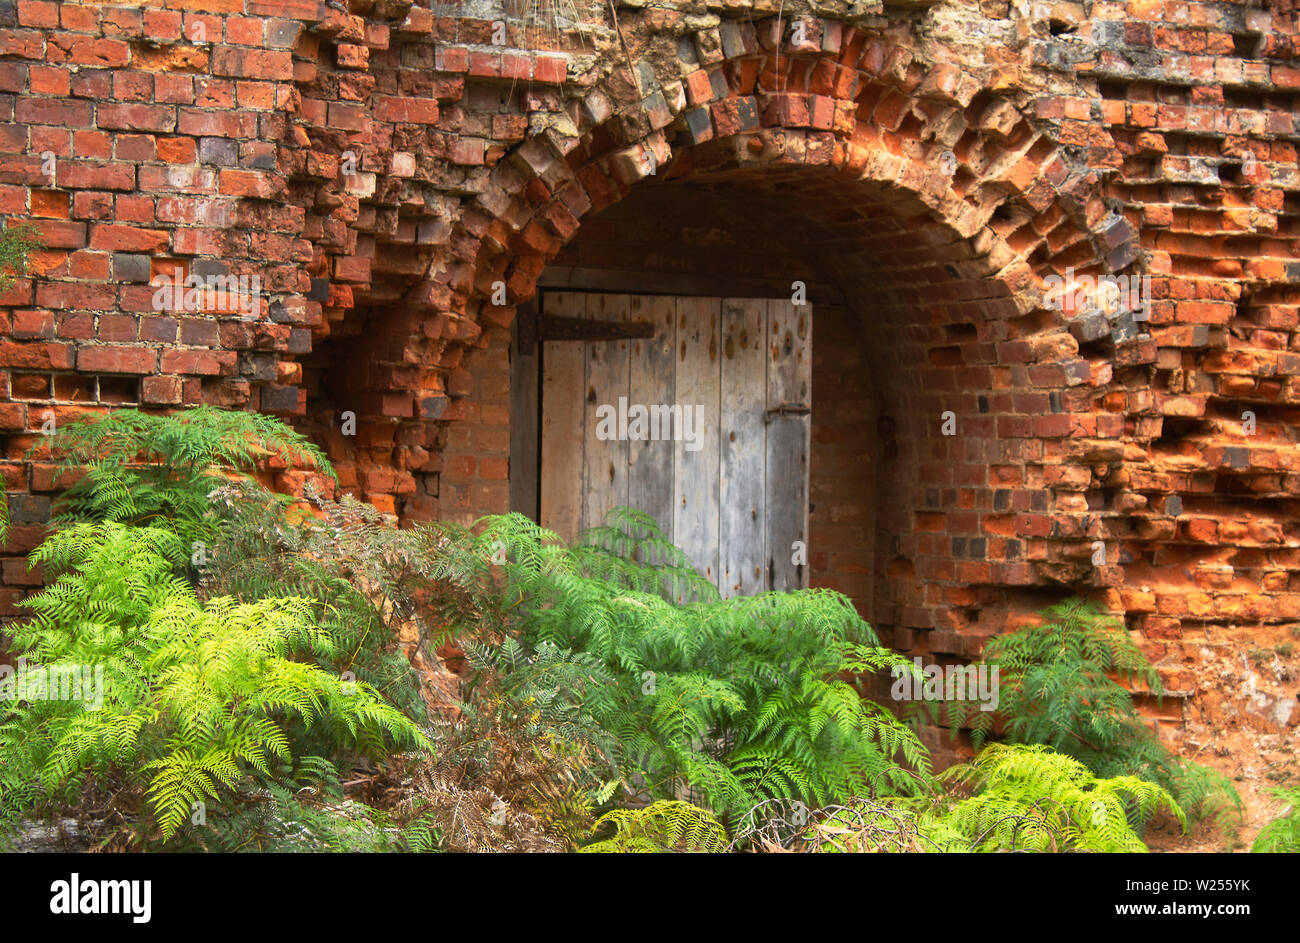 Antique bricks line the walls of a brick kiln on Maria Island, Tasmania, with bracken ferns in front of a partly-open wooden door Stock Photo